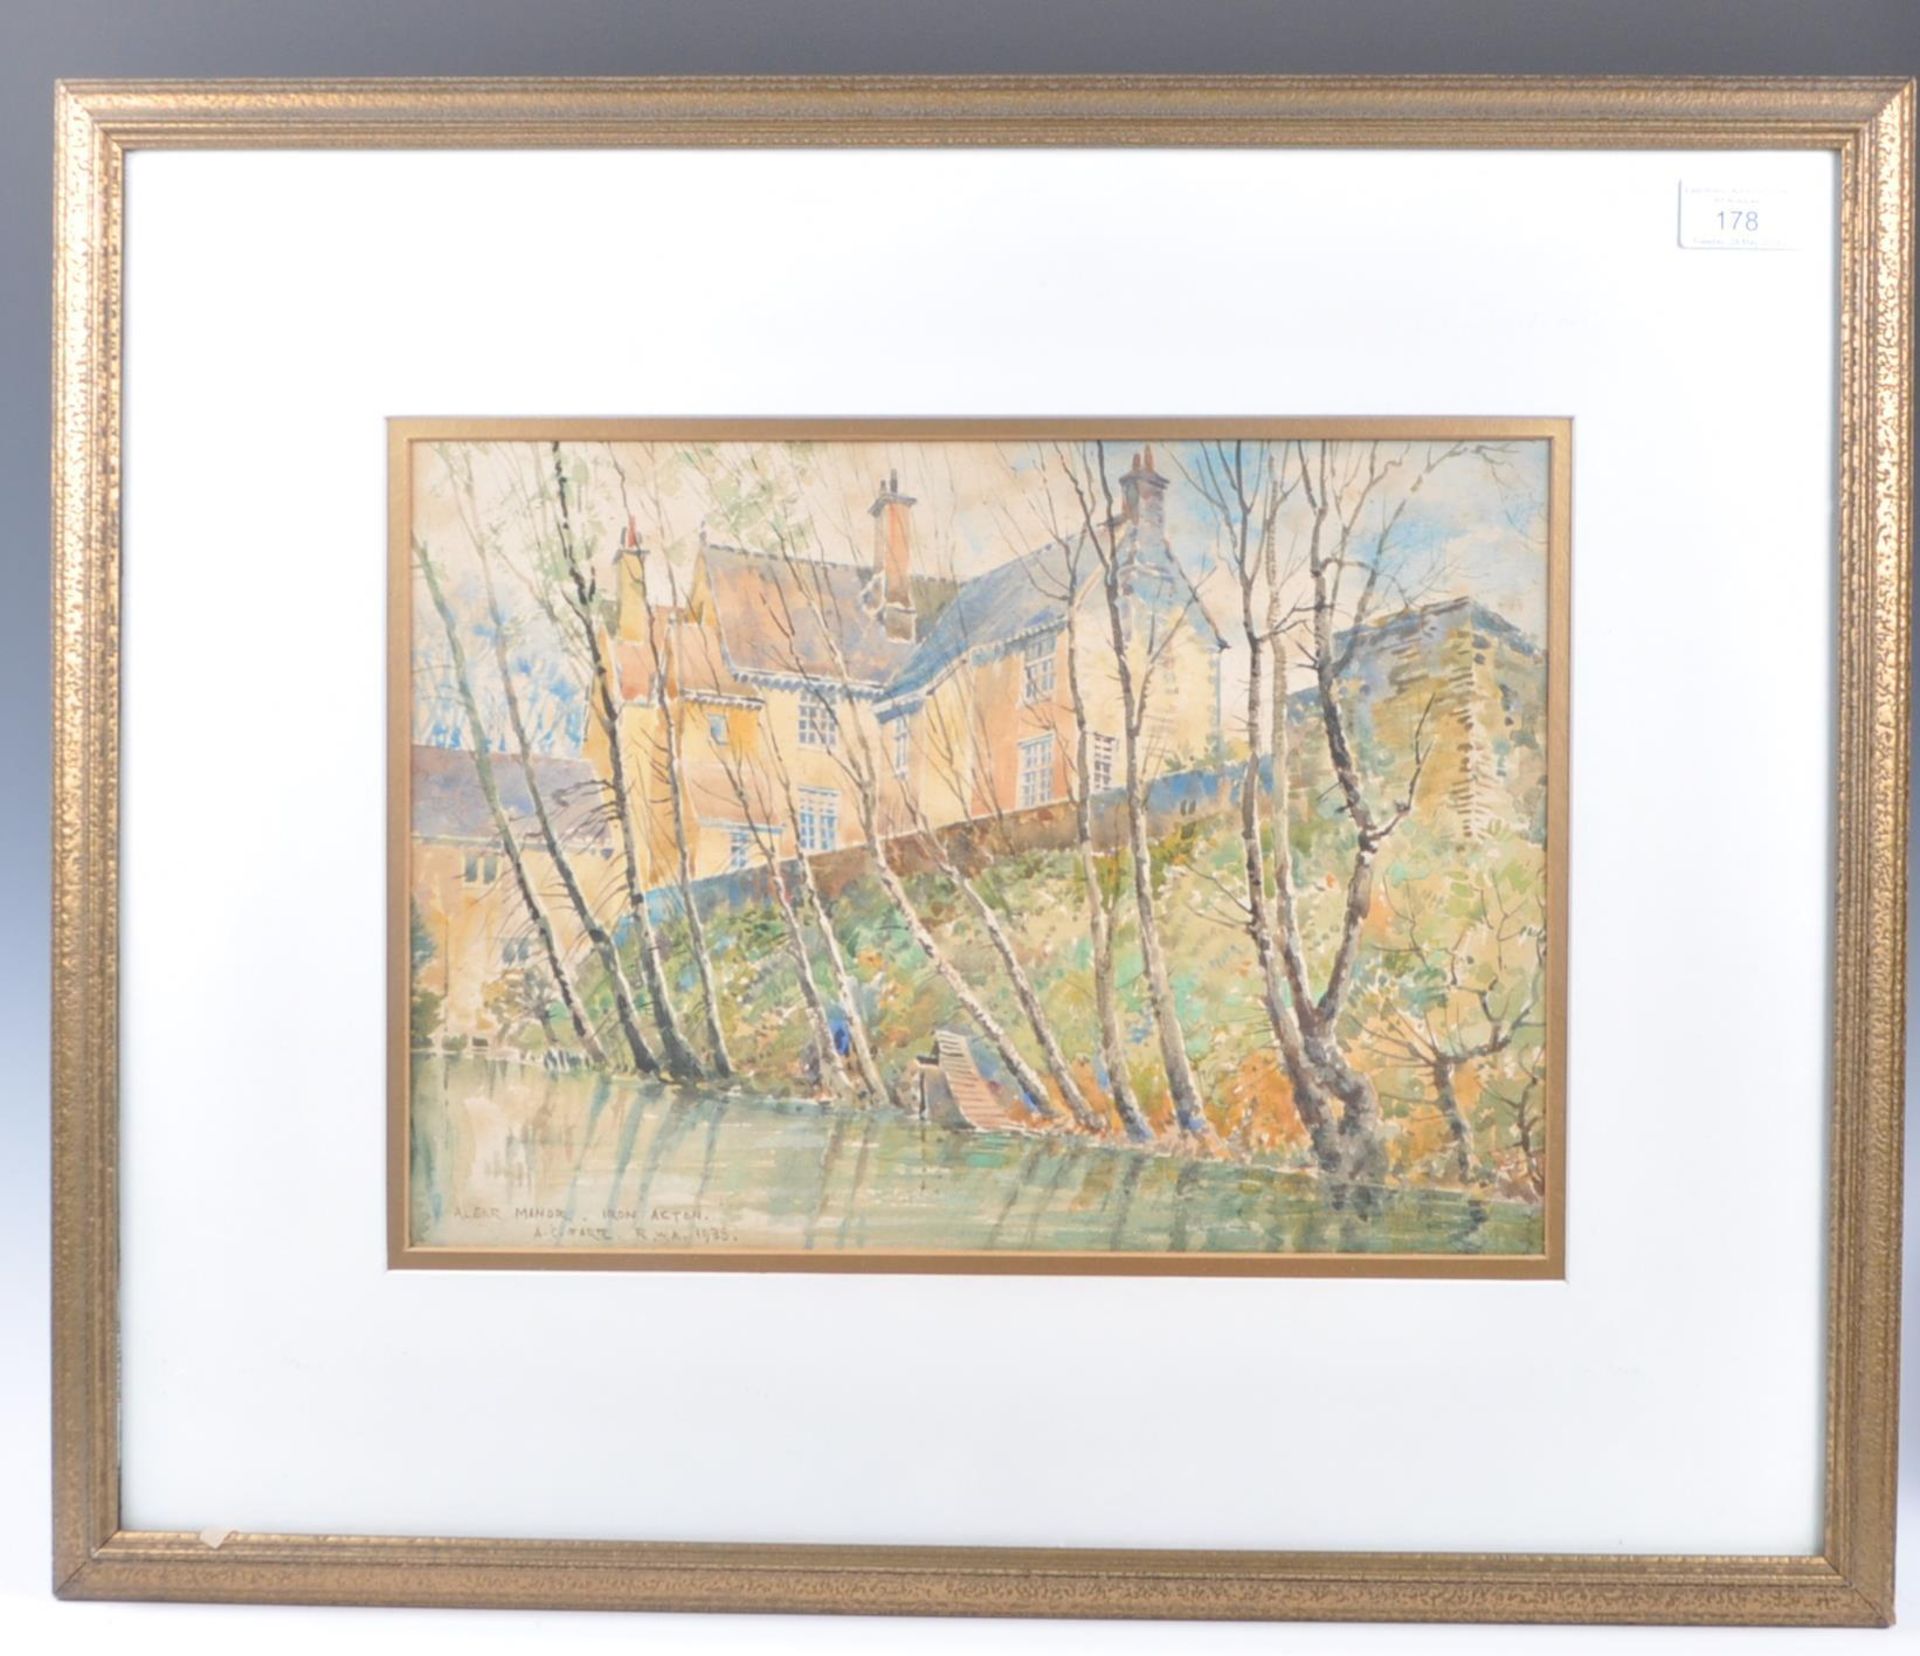 ARTHUR CHARLES FARE (1876-1958) WATERCOLOUR PAINTING IRON ACTON - Image 2 of 5